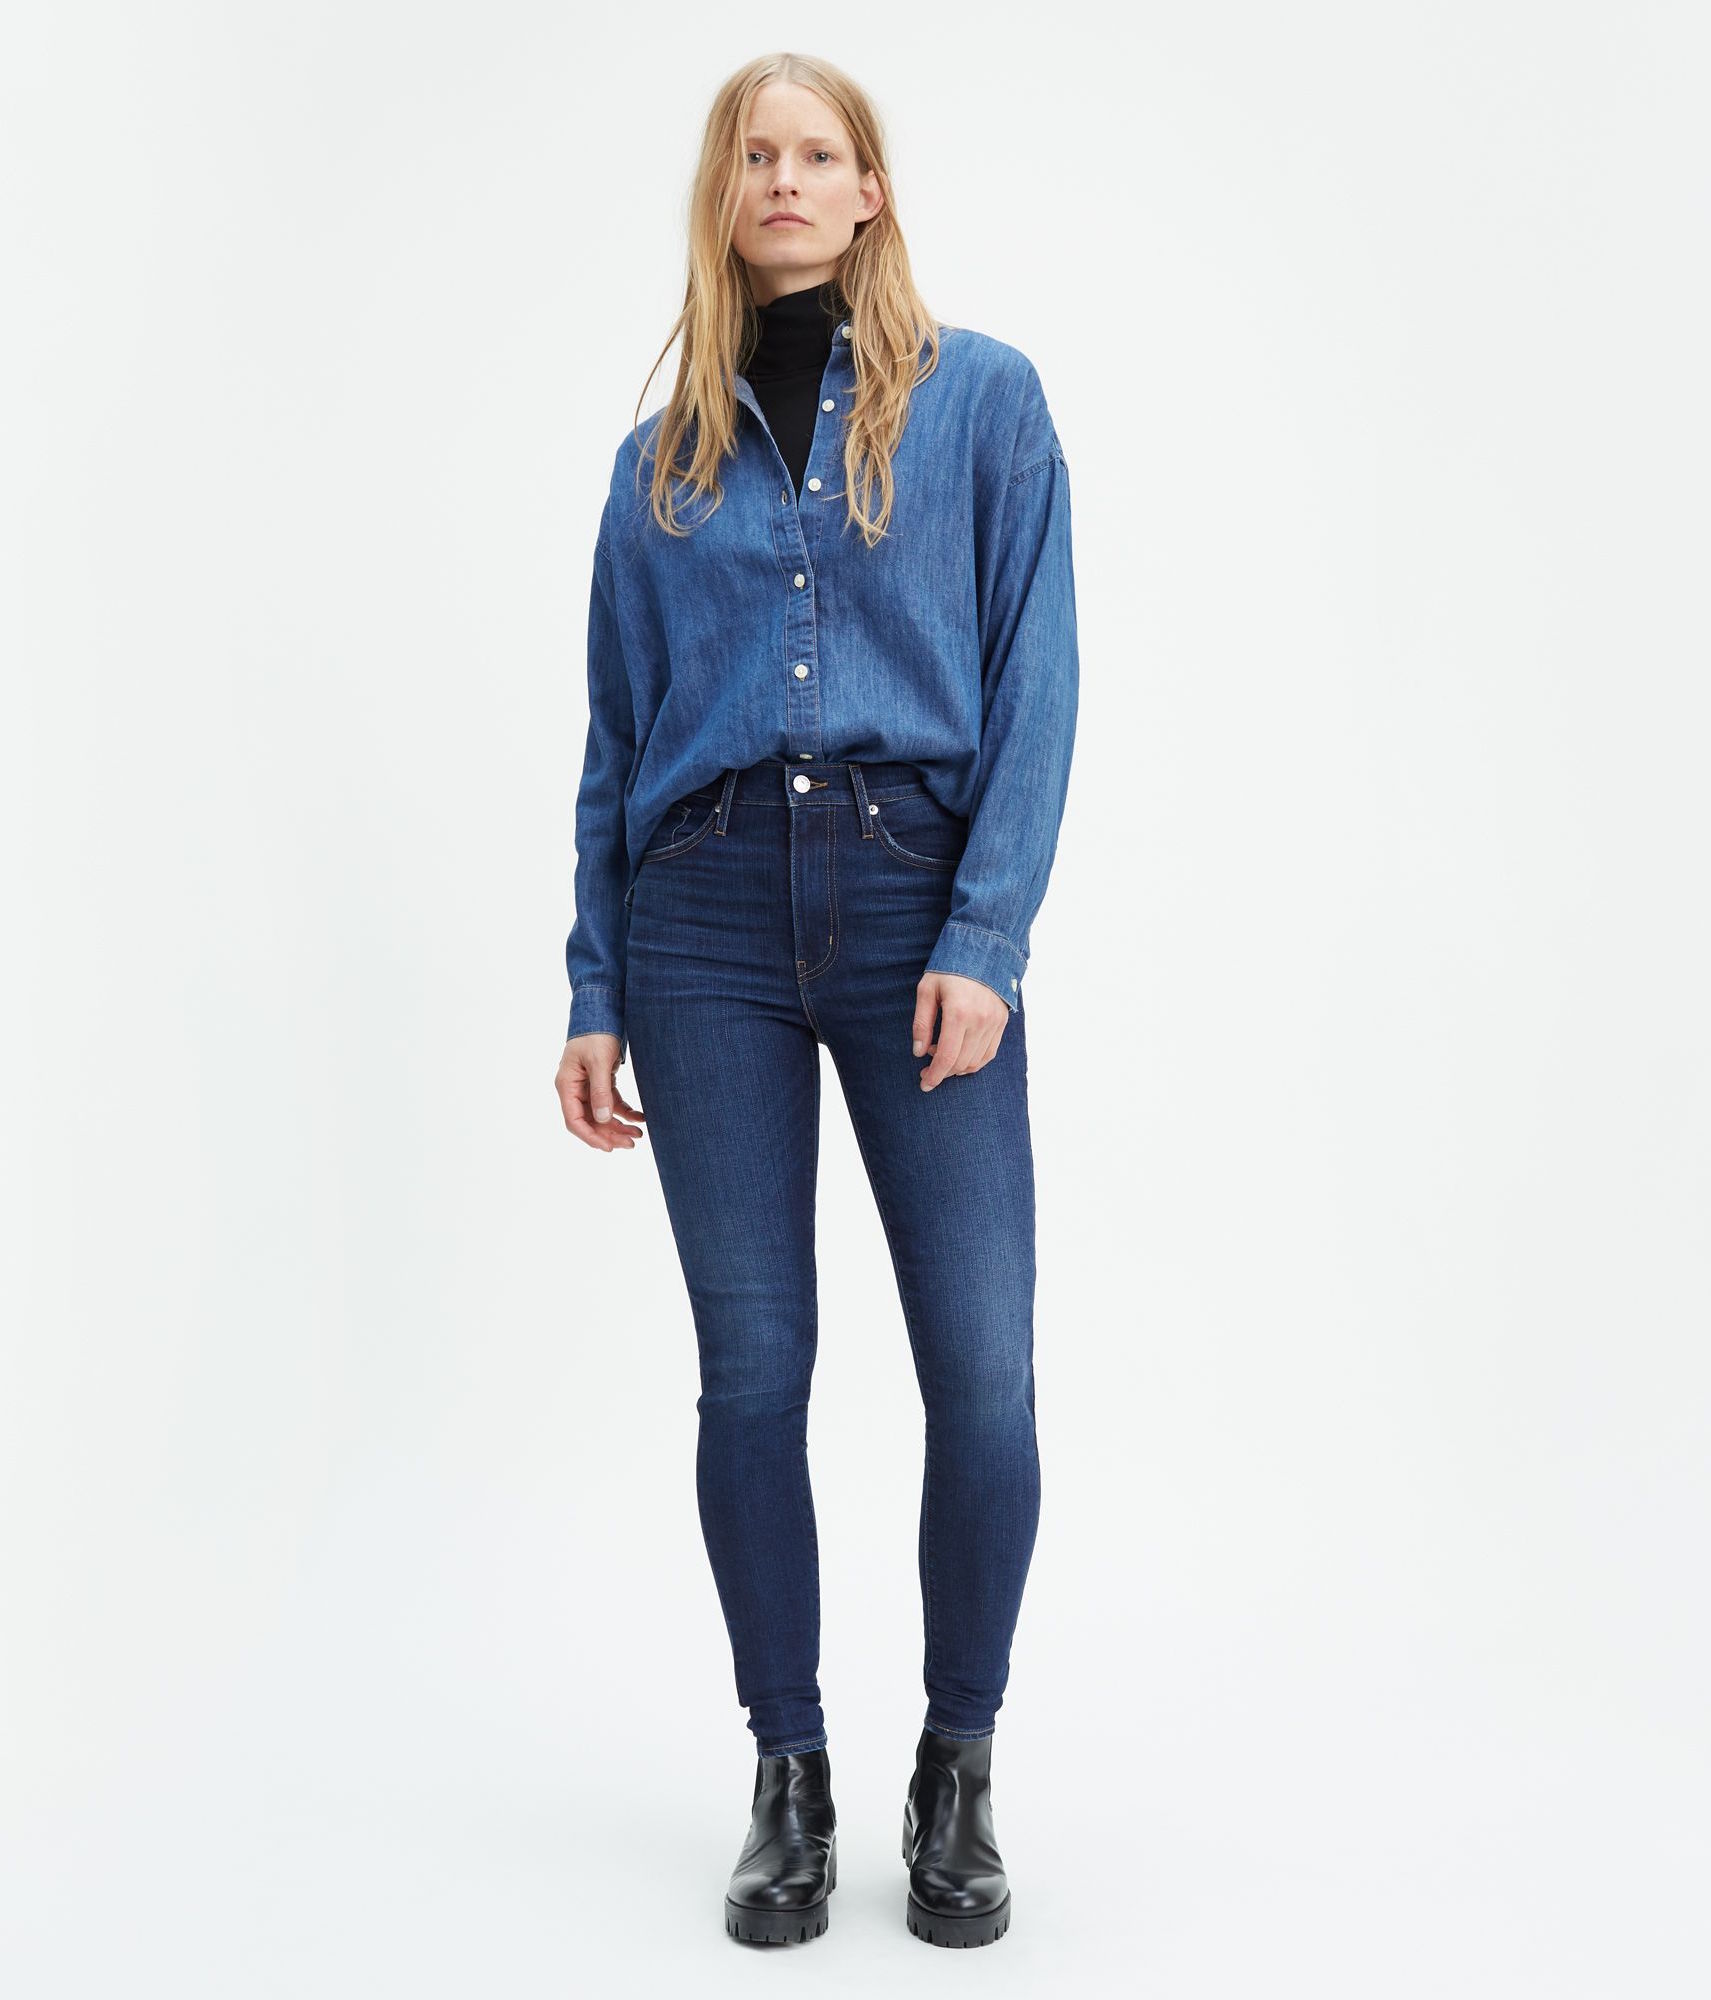 The 8 Best Levi’s Jeans For Summer - THE JEANS BLOG